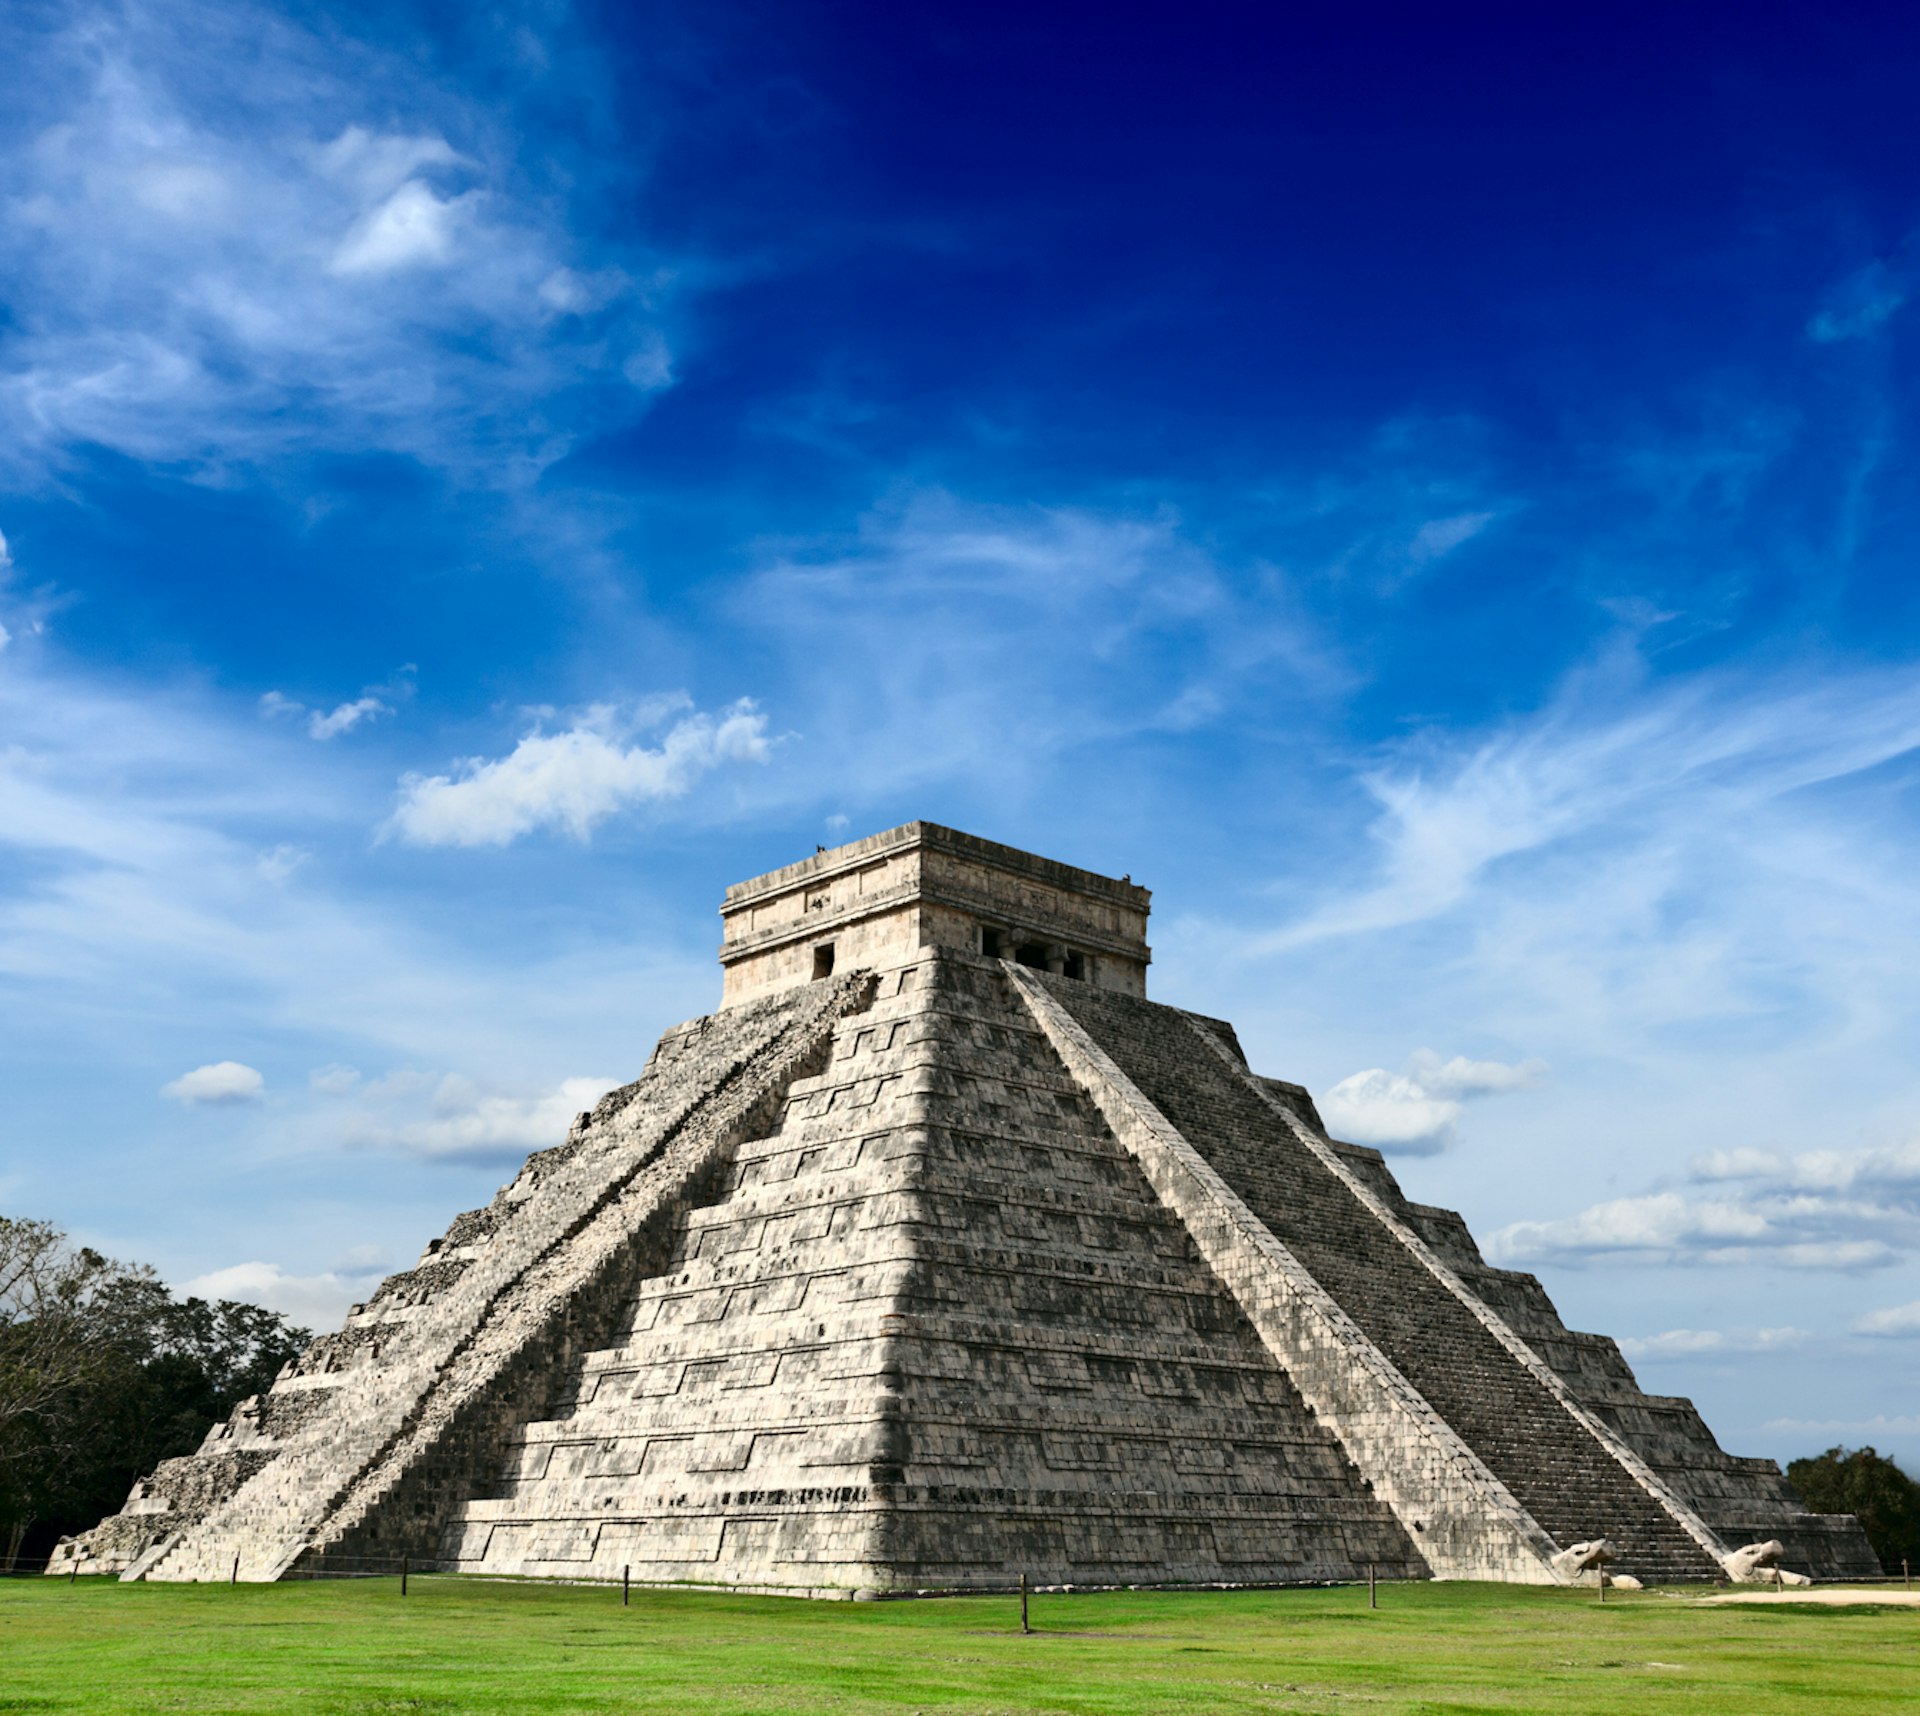 You're unlikely to have the site all to yourself, but Chichén Itzá is a must-see day trip from Mérida © f9photos/Shutterstock